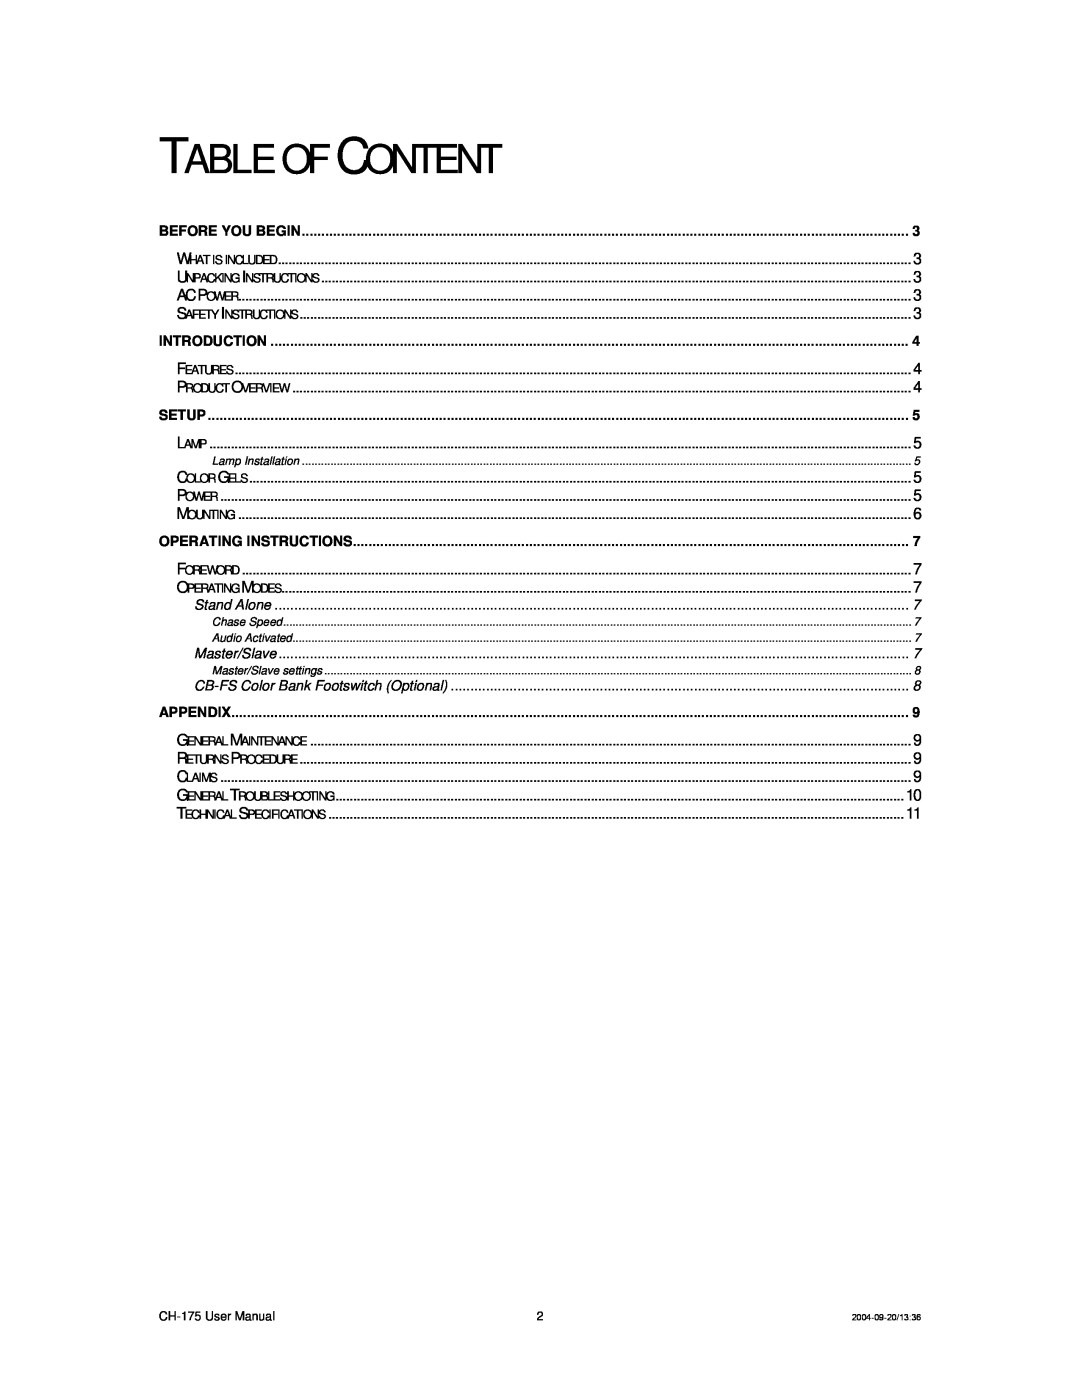 Chauvet CH-175 user manual Table Of Content, Before You Begin 